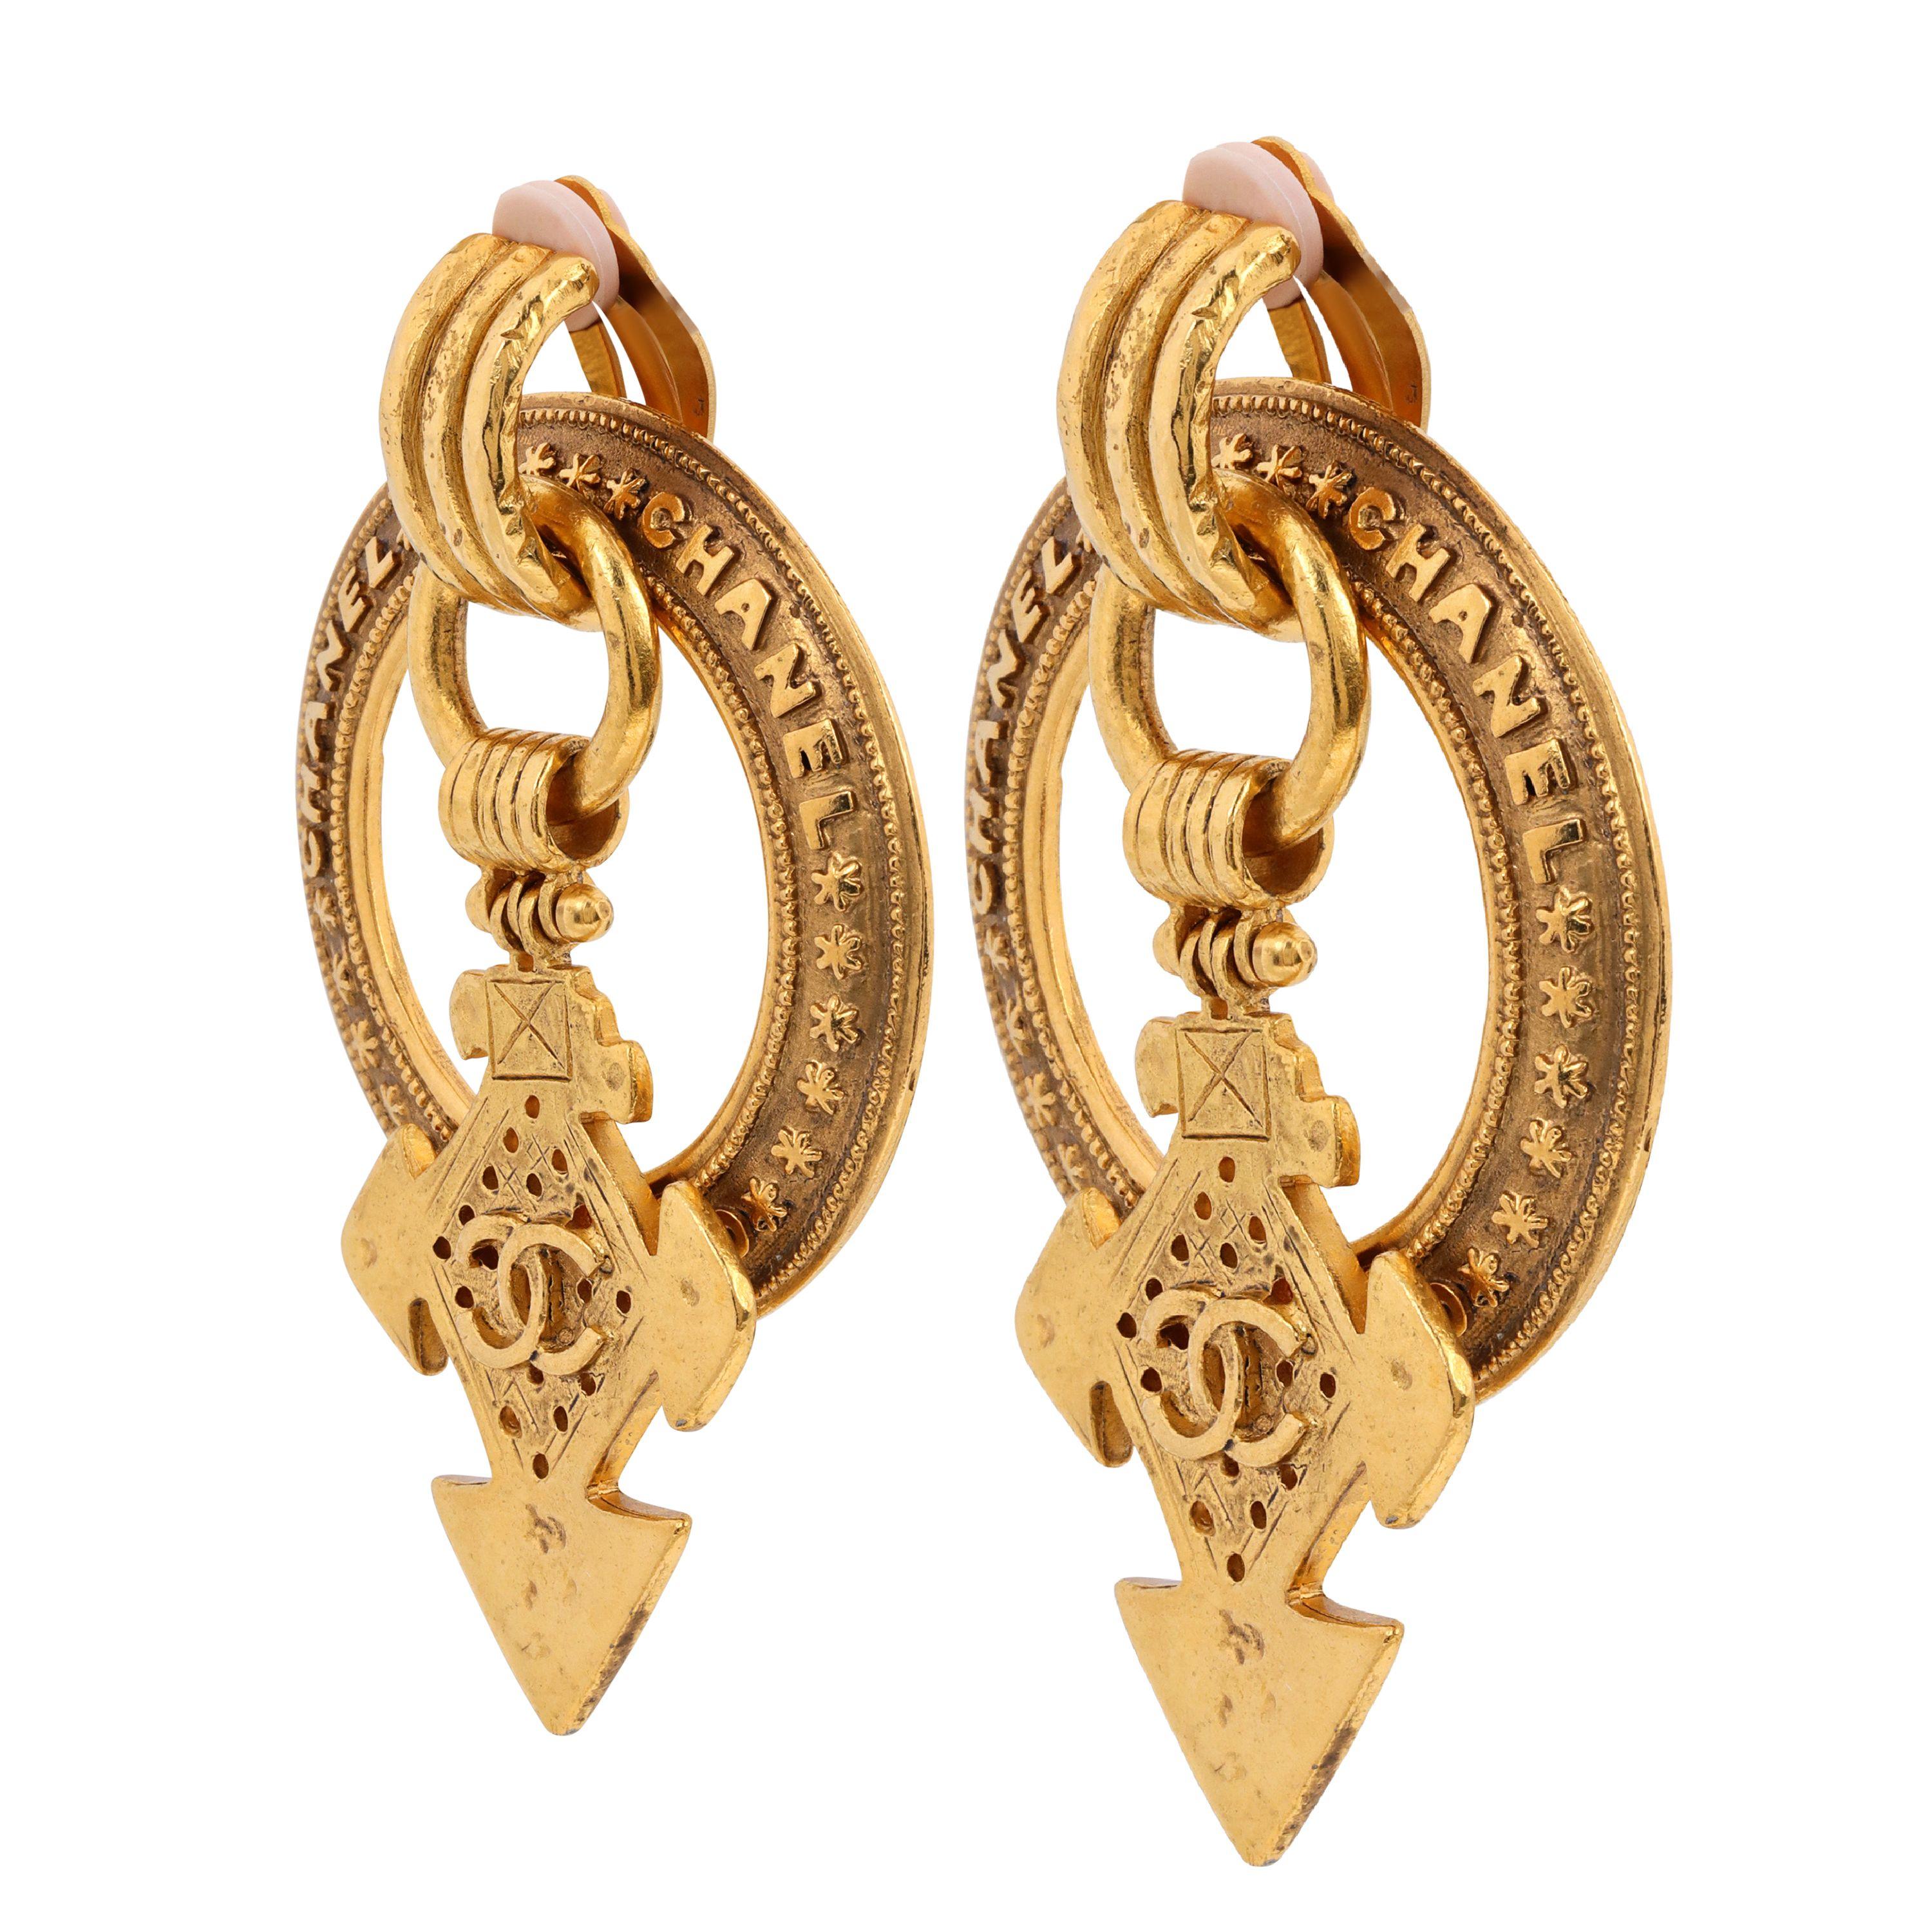 These authentic Chanel Gold Plated Aztec Cross Hoop Earrings are in excellent vintage condition.  24 karat gold plated metal front facing hoop with CC’s and Aztec crosses.  Clip on style.  Box or pouch included.

PBF 14054
